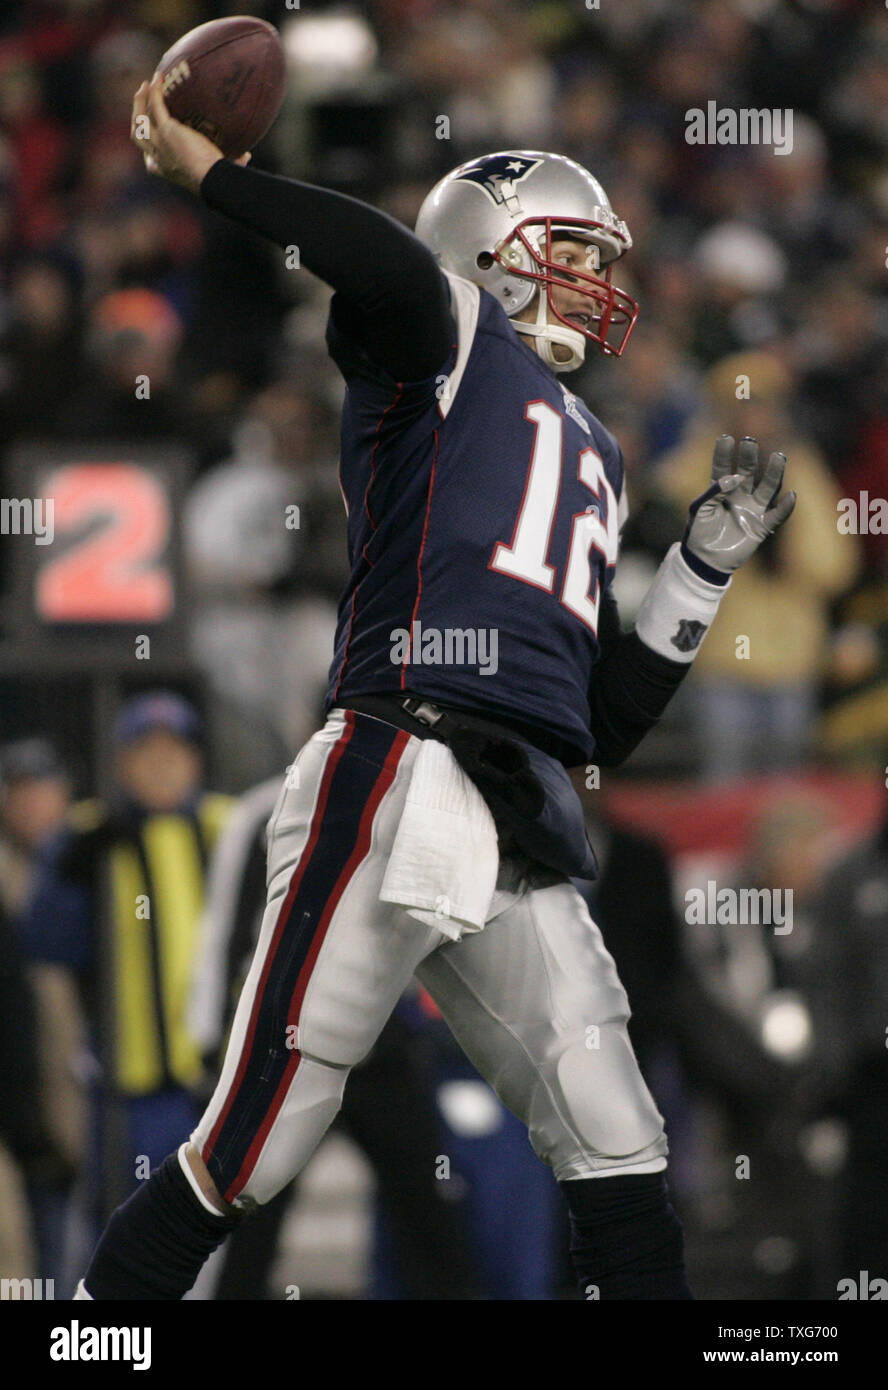 New England Patriots quarterback Tom Brady (12) throws against the Green Bay Packers in the third quarter at Gillette Stadium in Foxboro, Massachusetts on December 19, 2010.  The Patriots defeated the Packers 31-27.   UPI/Matthew Healey Stock Photo